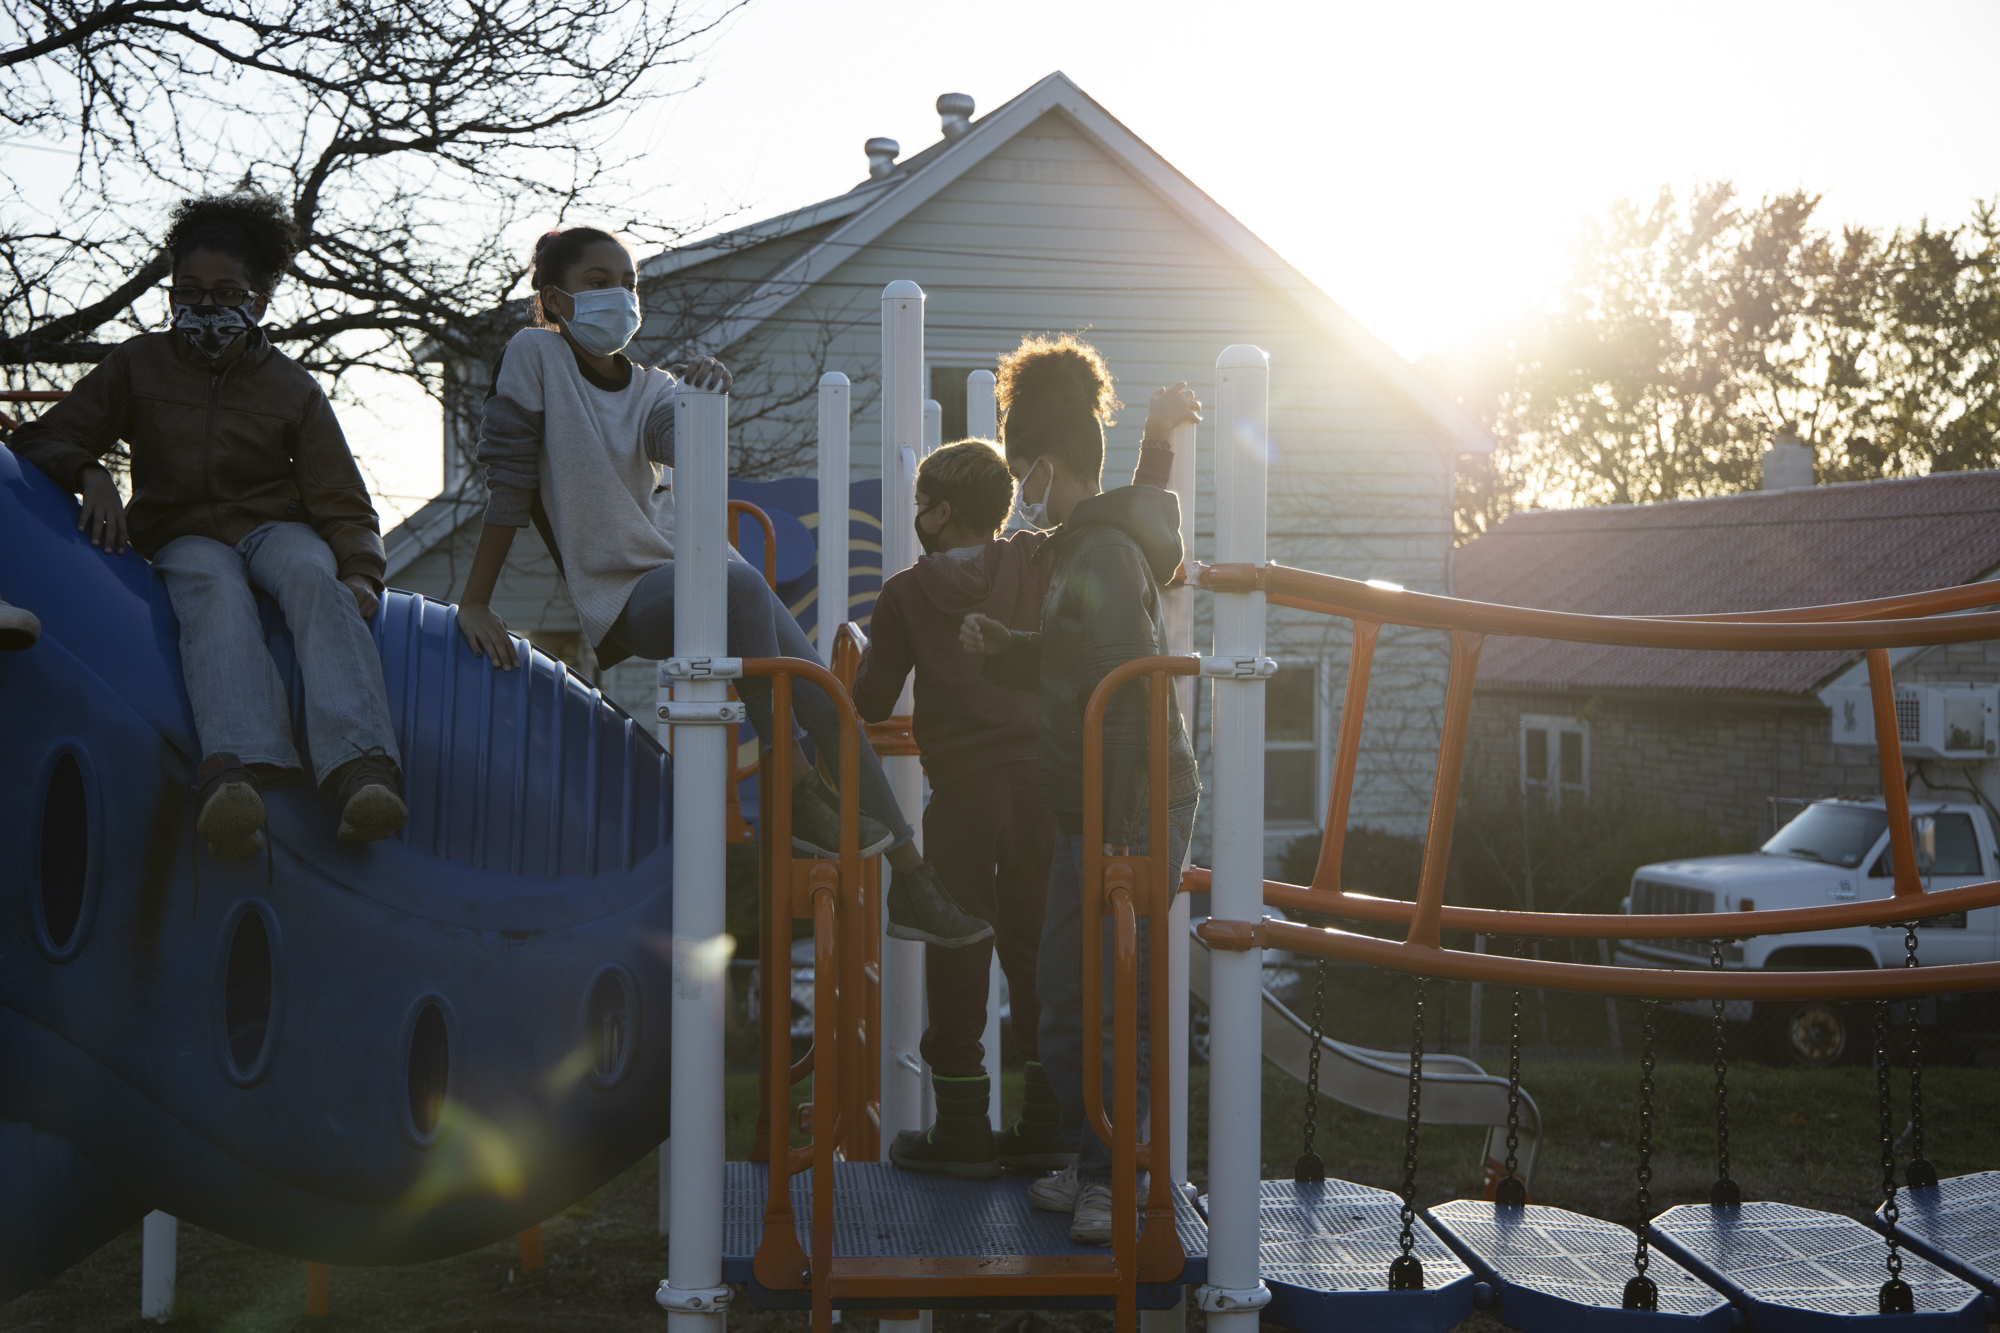 From left to right, Jayden King (13), Jewel Pierce (14), Caspian Pierce (10), and Javonte (14) are aware of the inequality of the Syracuse City School Districts. They know their neighbors do not always have adult supervision to monitor or help them with virtual schoolwork because their parents and or guardians are at work.